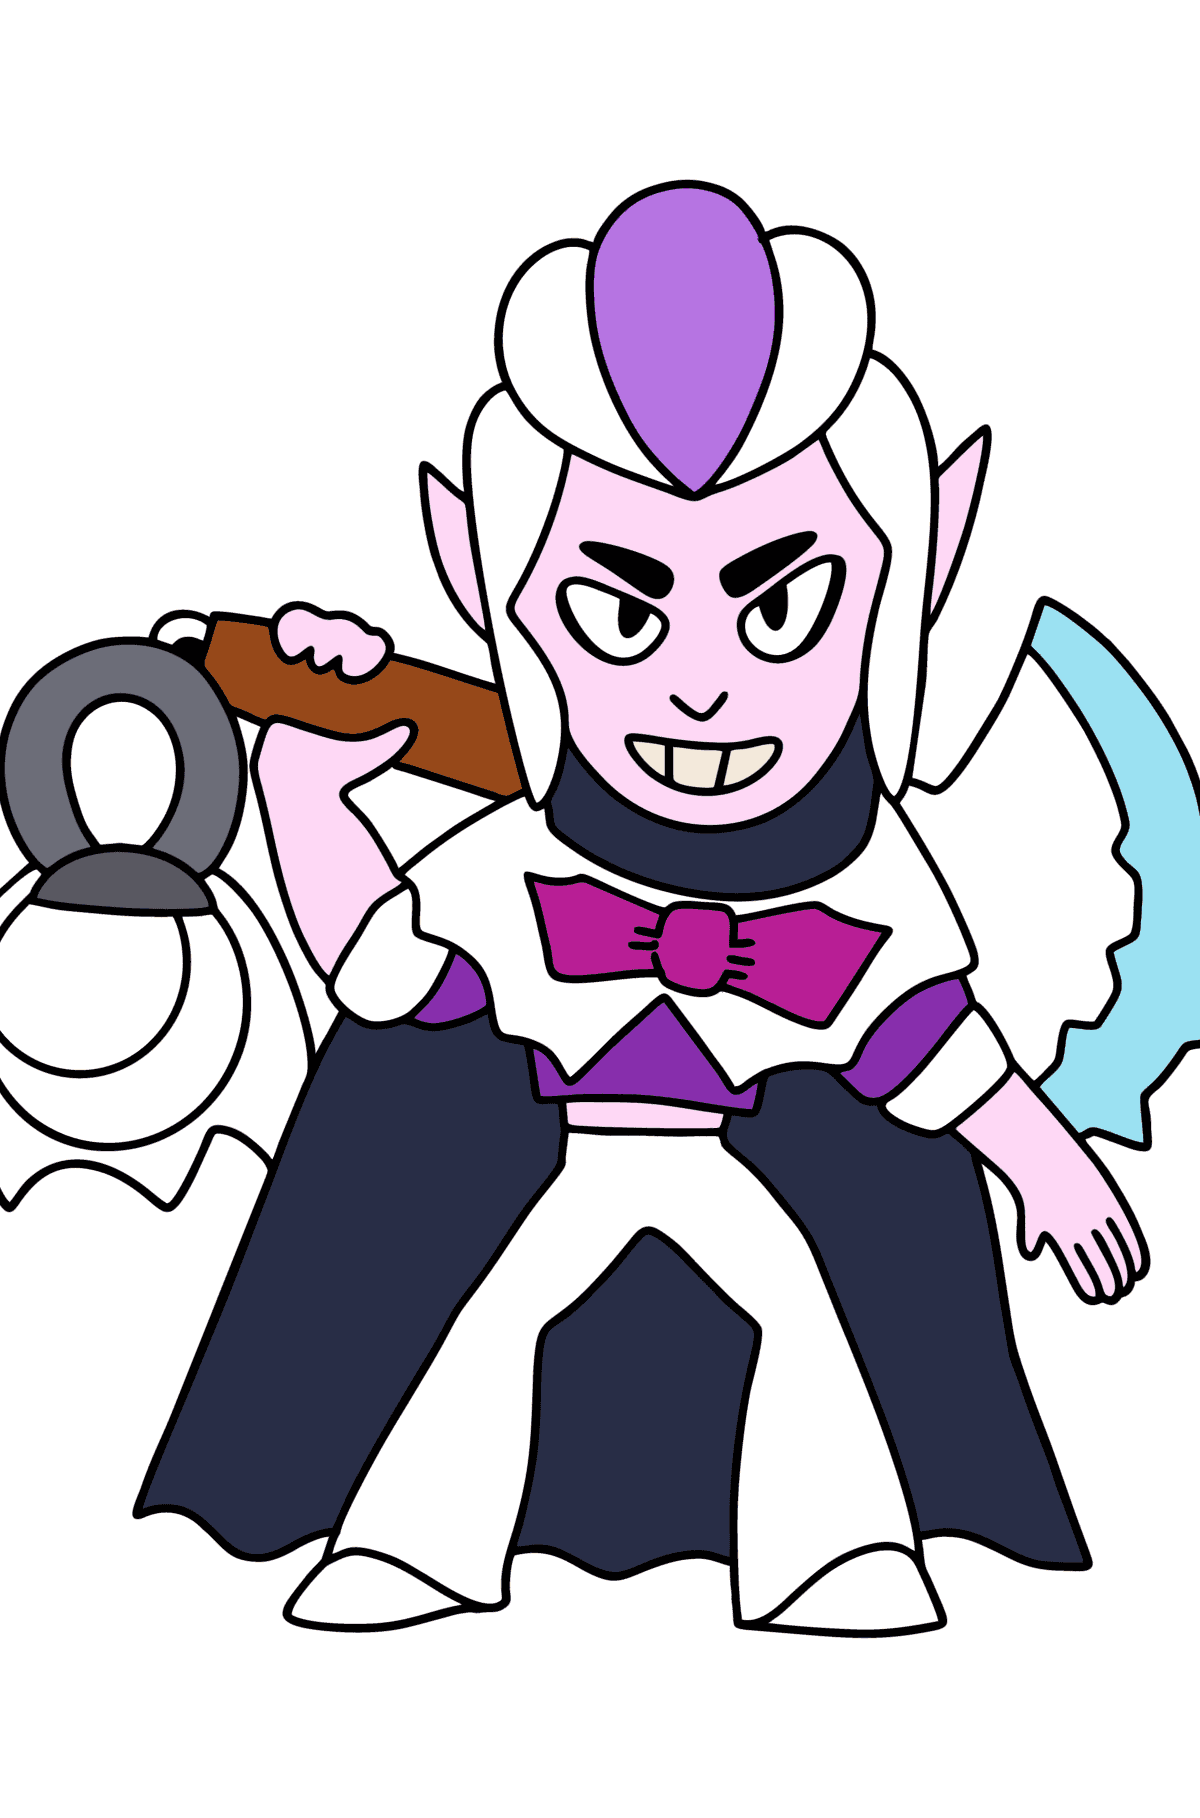 Brawl Stars Mortis coloring page - Coloring Pages for Kids